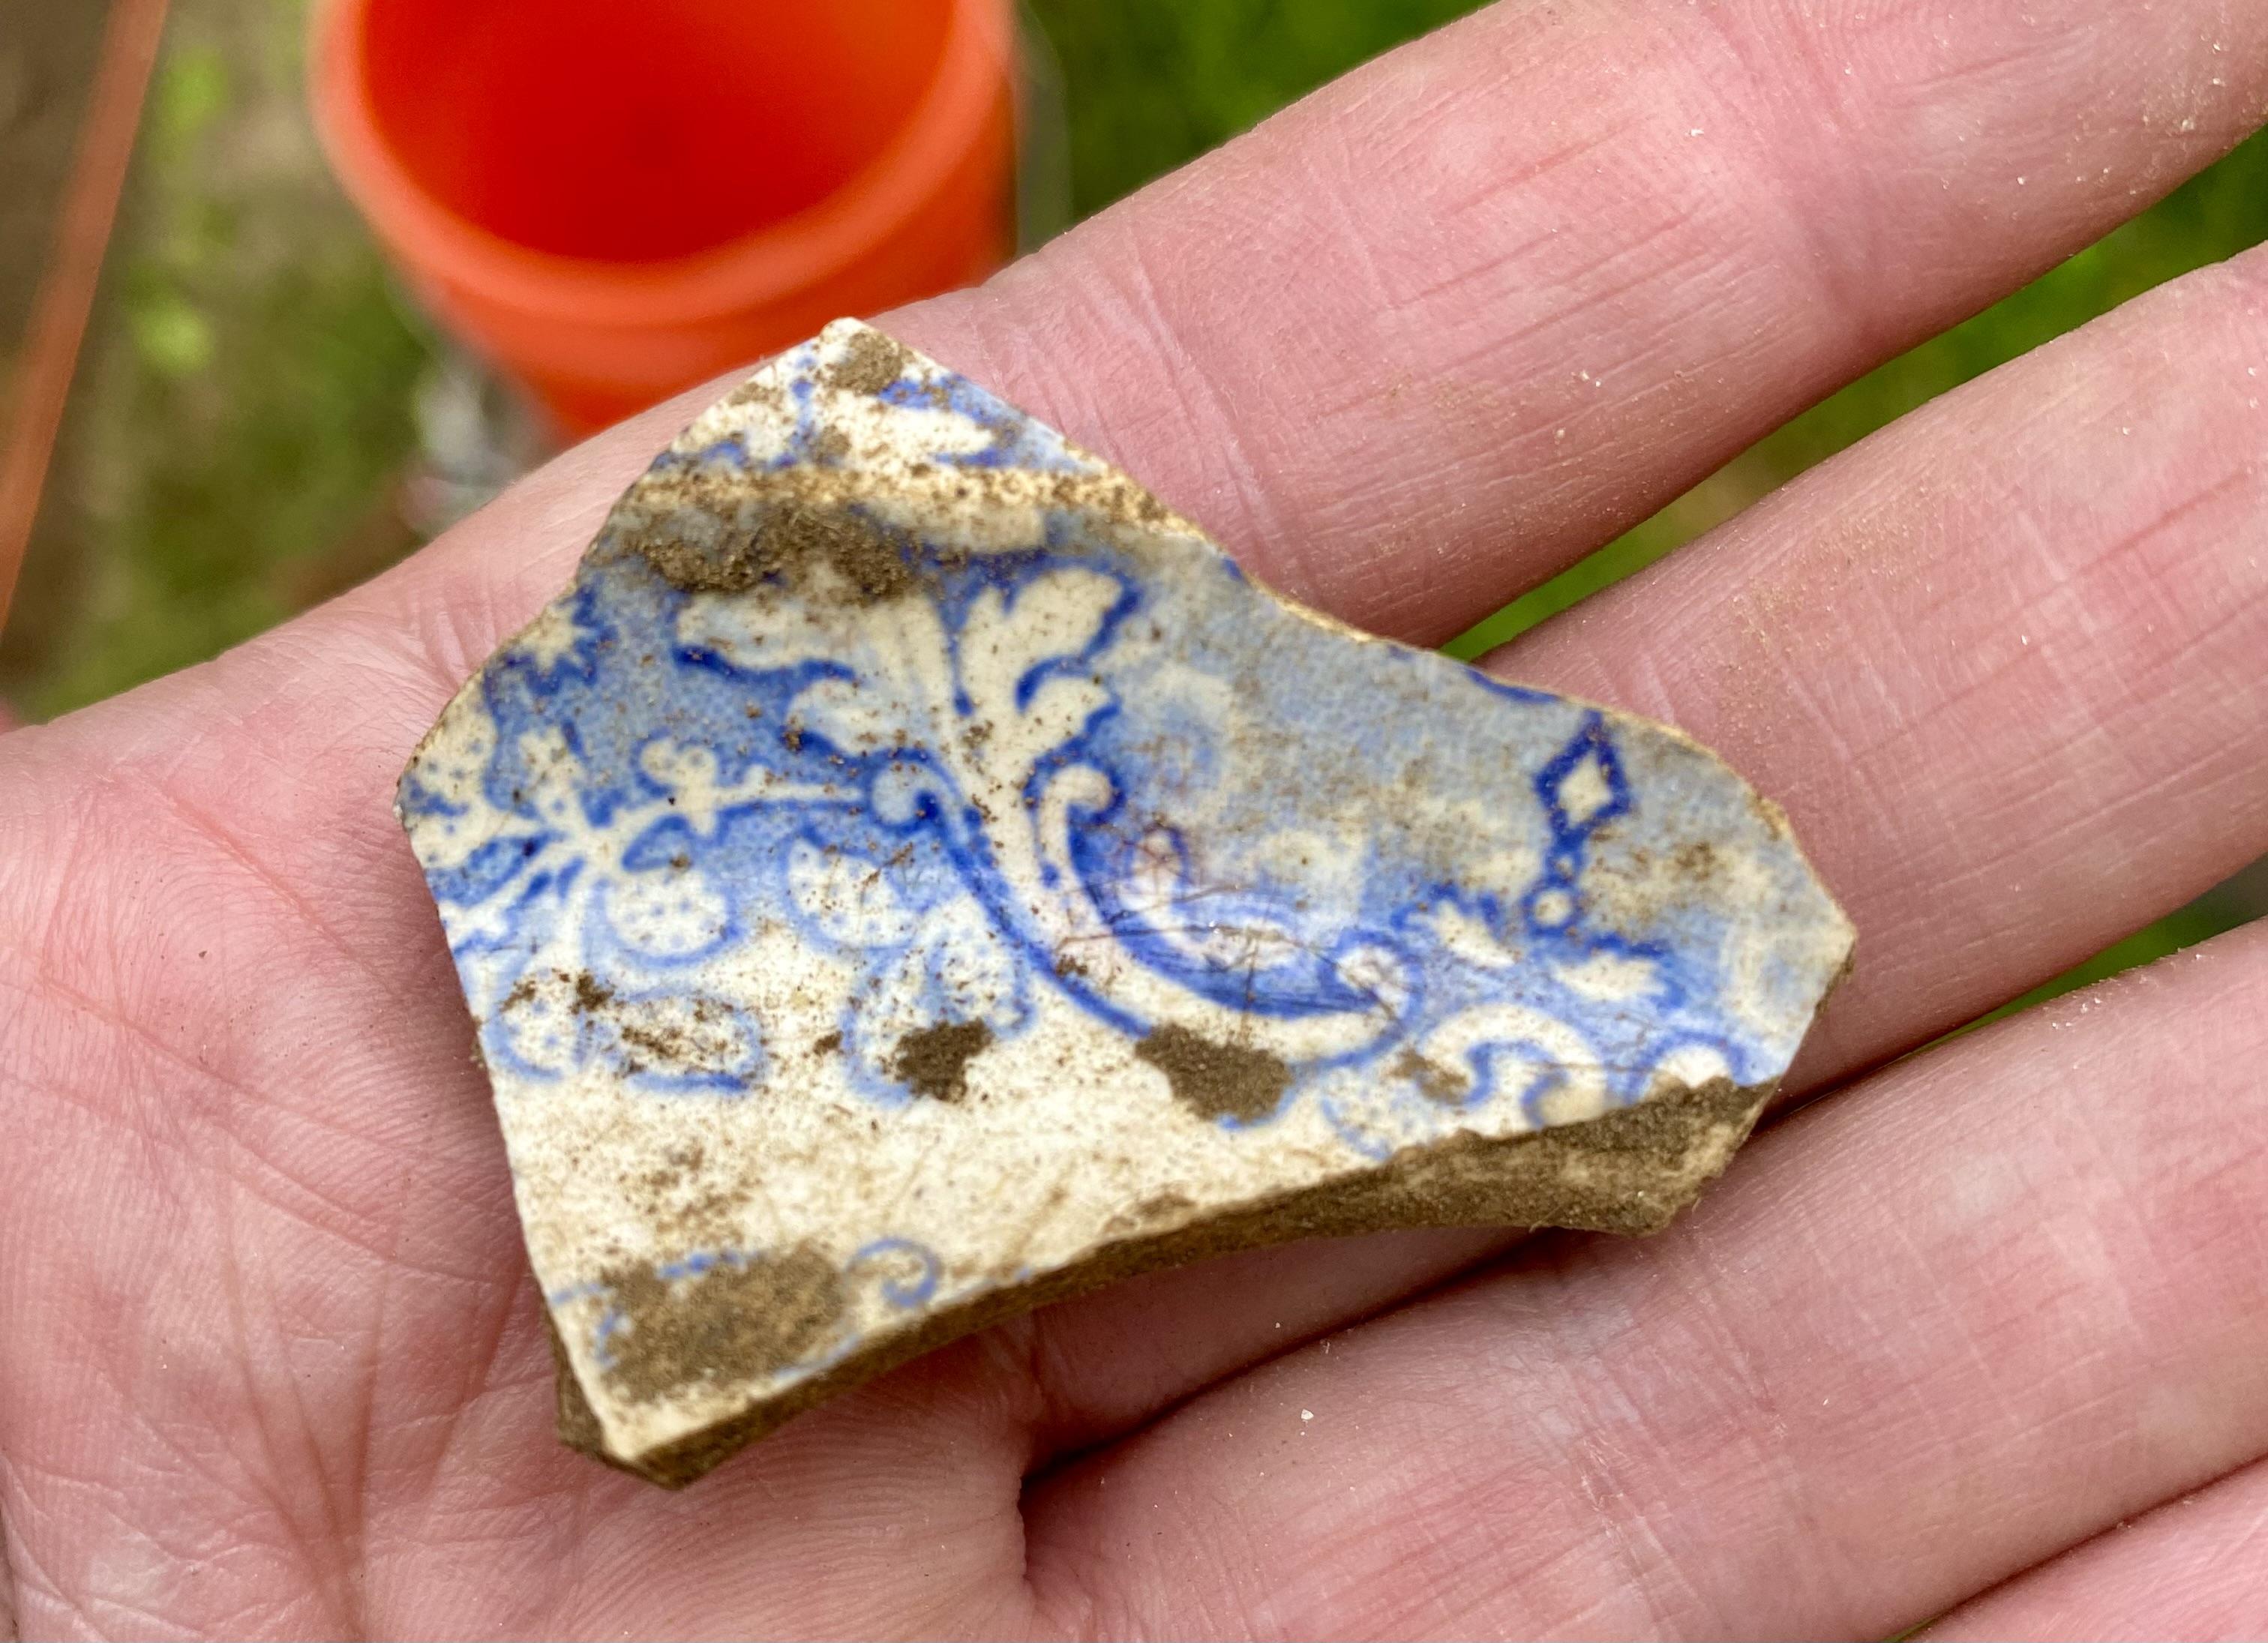 Shard of 19th century ceramic from the archaeological dig.